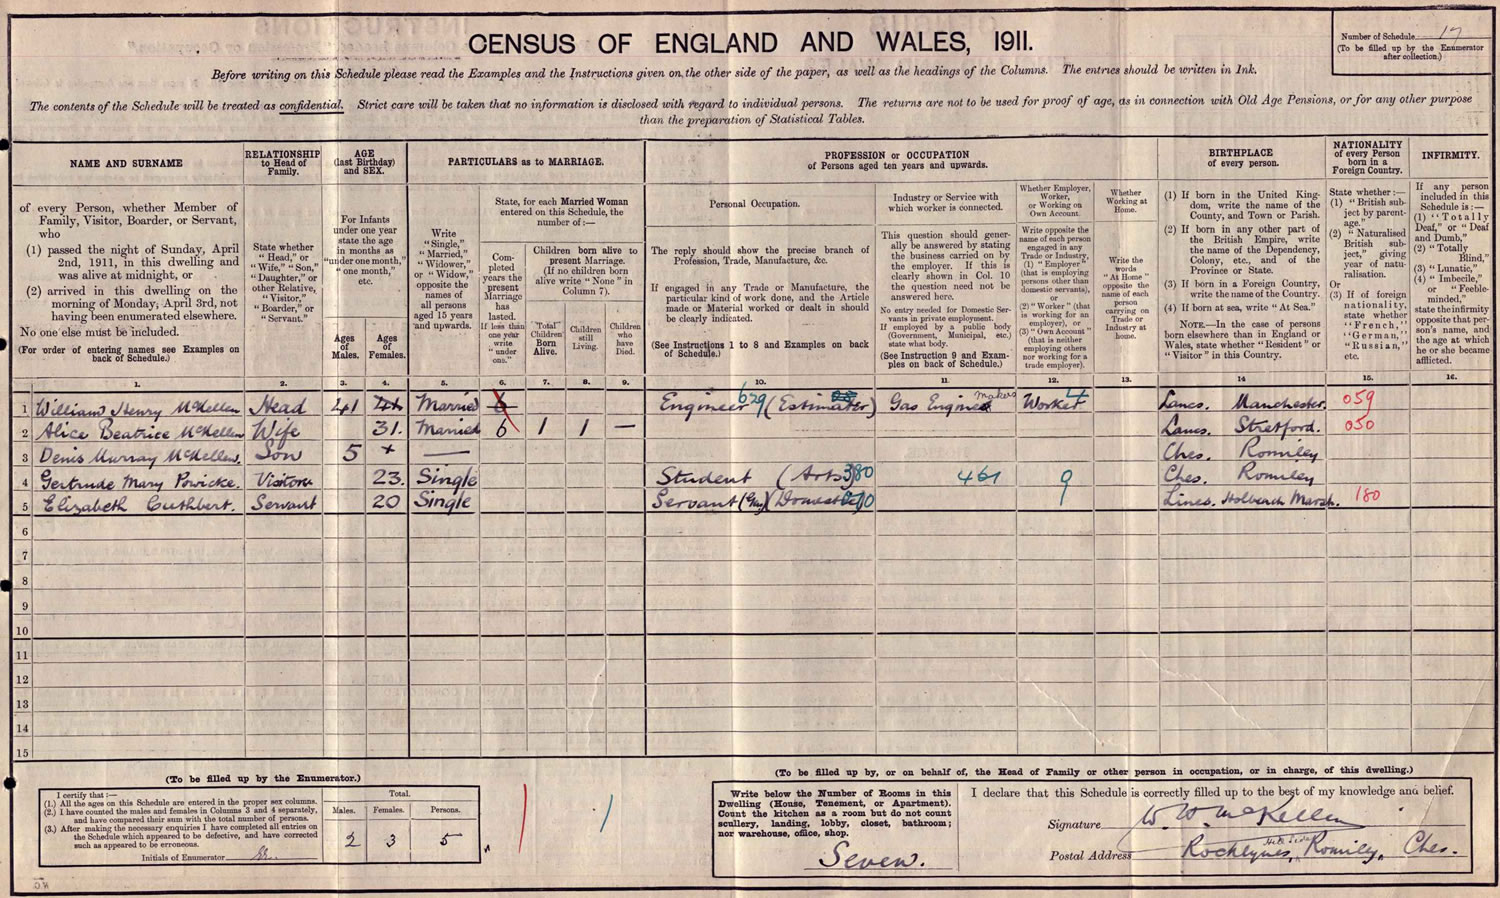 Sir Ian McKellen's father and grandparents in the 1911 census on TheGenealogist